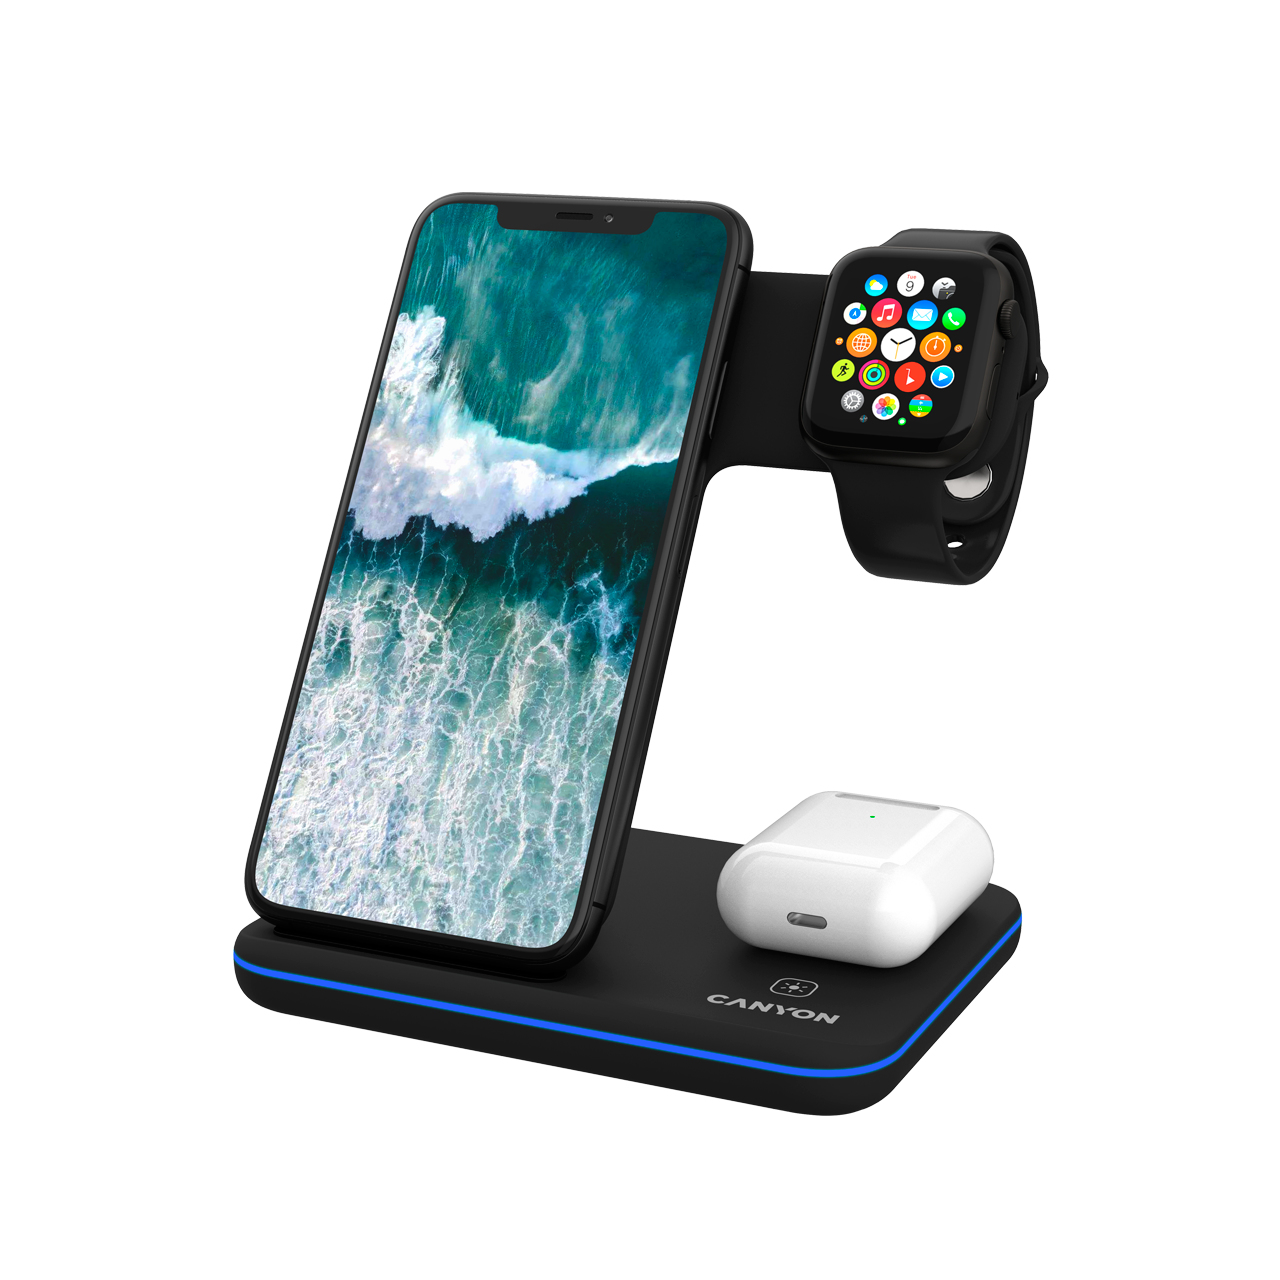 CNS-WCS303B CANYON WS-303 3in1 Wireless charger Black